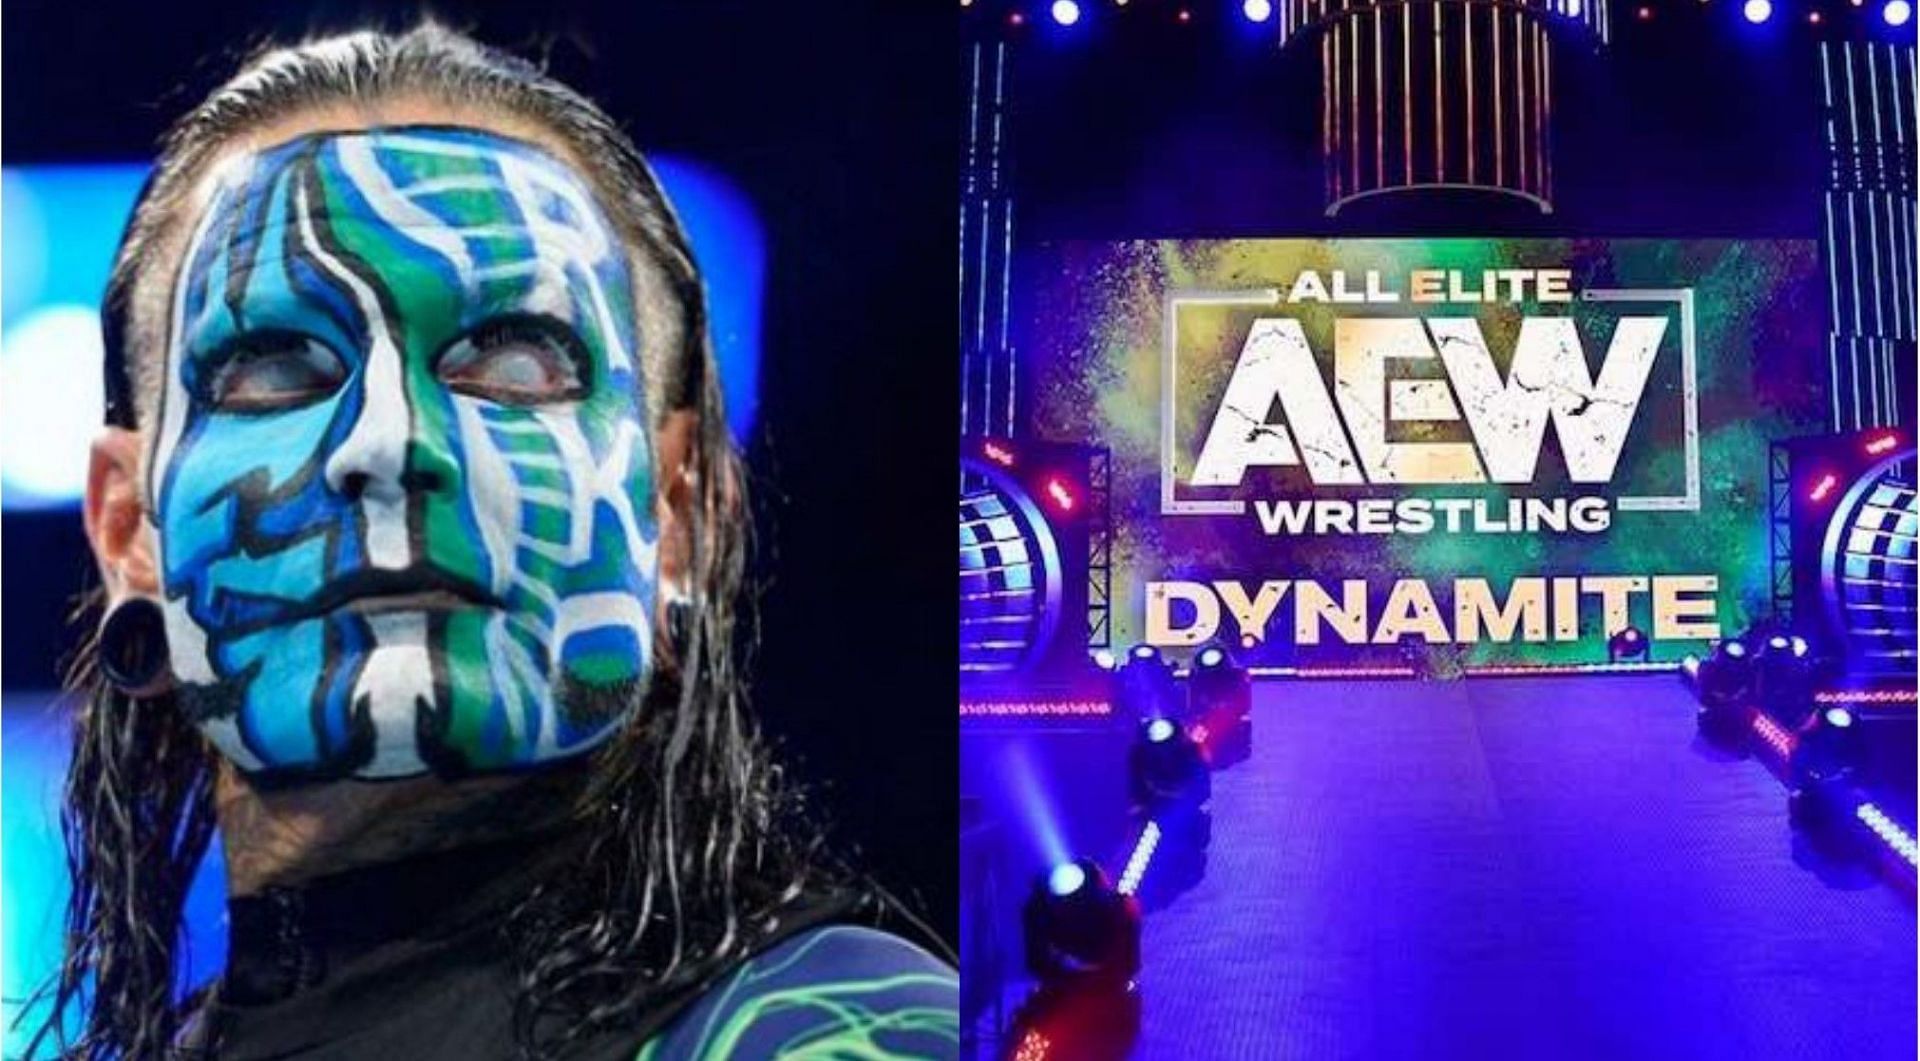 Is Charismatic Enigma All Elite?